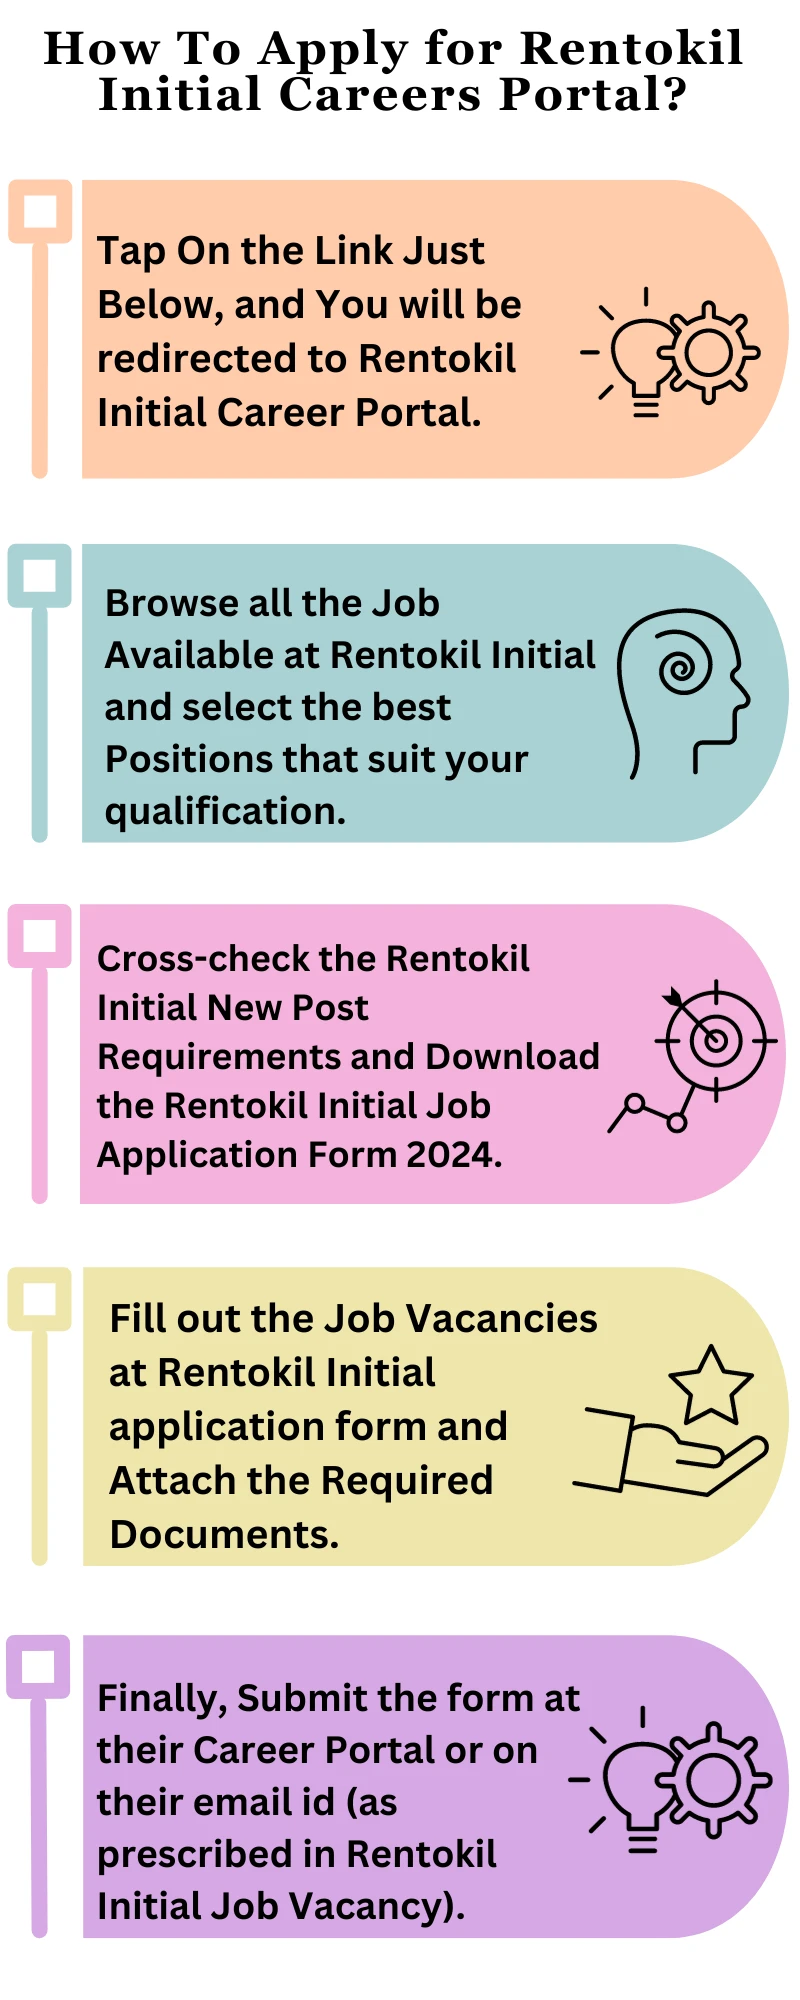 How To Apply for Rentokil Initial Careers Portal?